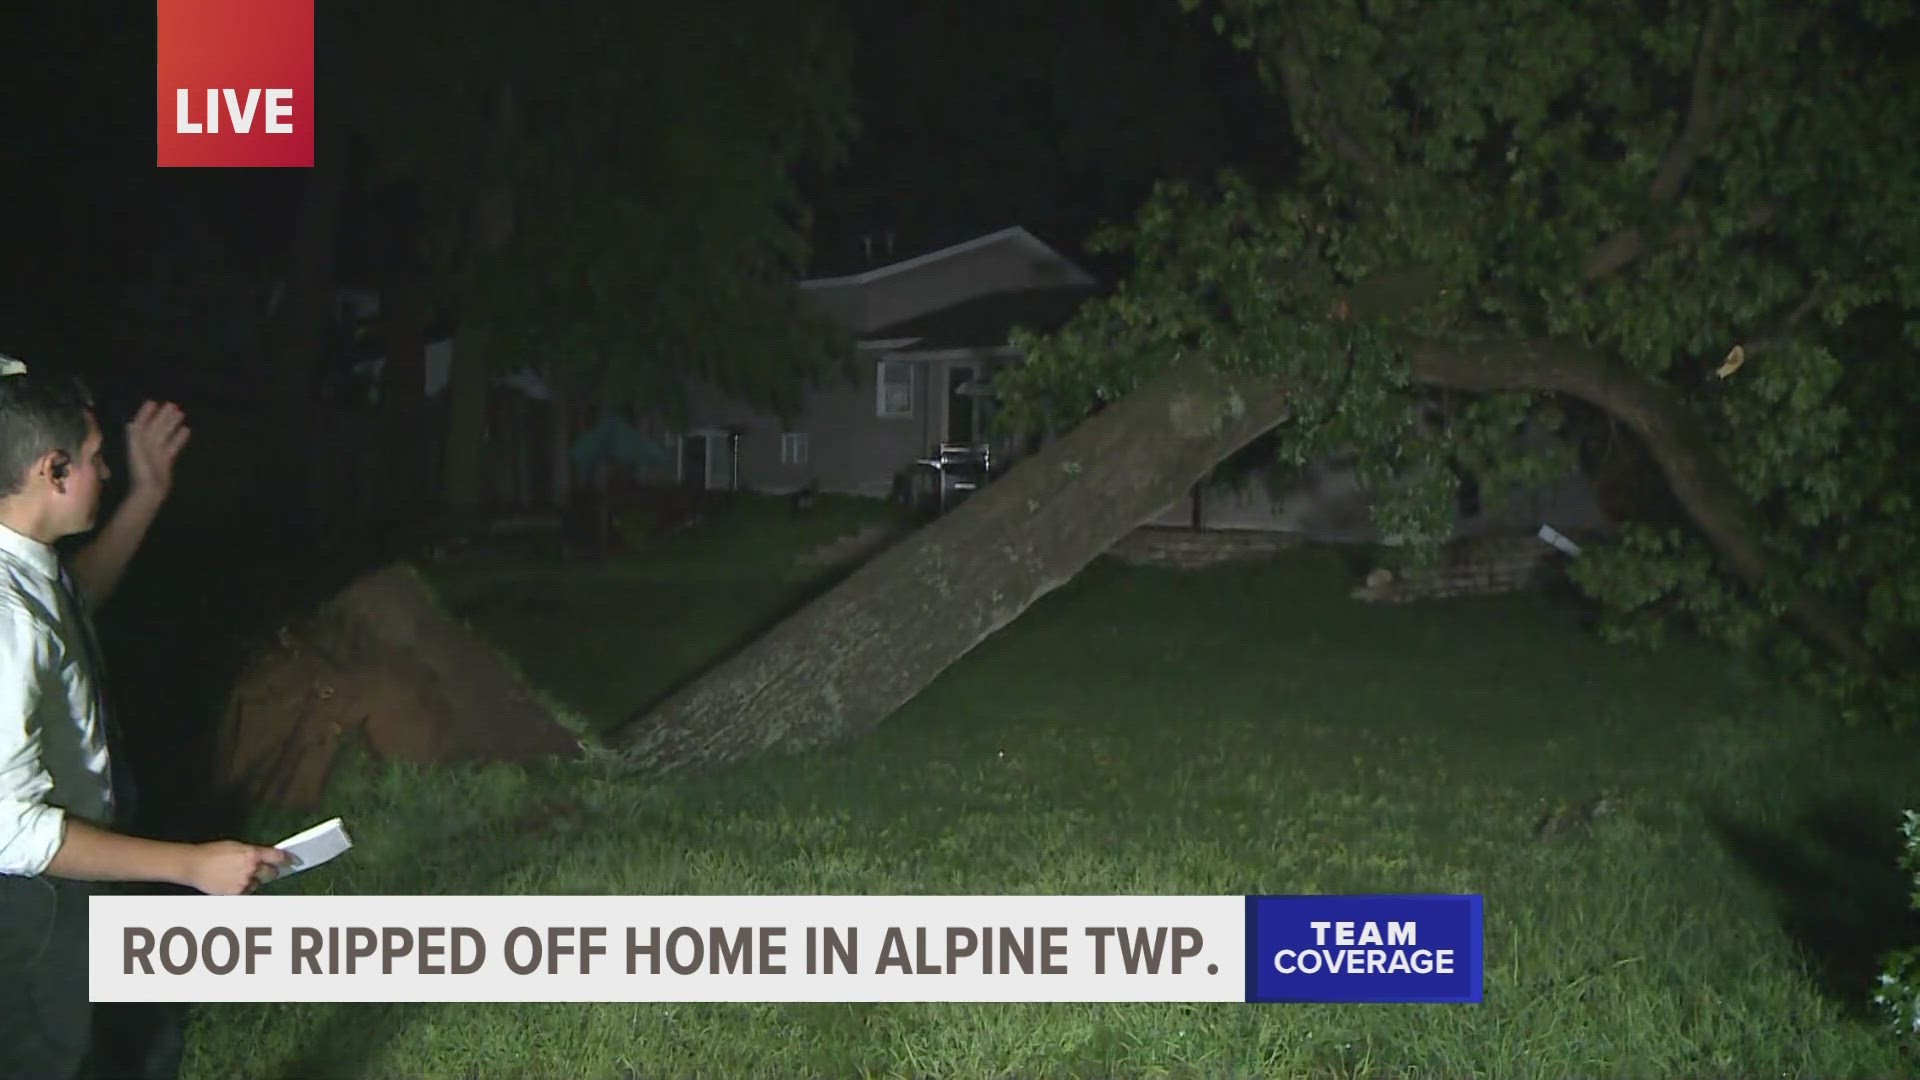 High winds caused downed powerlines and trees. In some areas, homes were damaged.